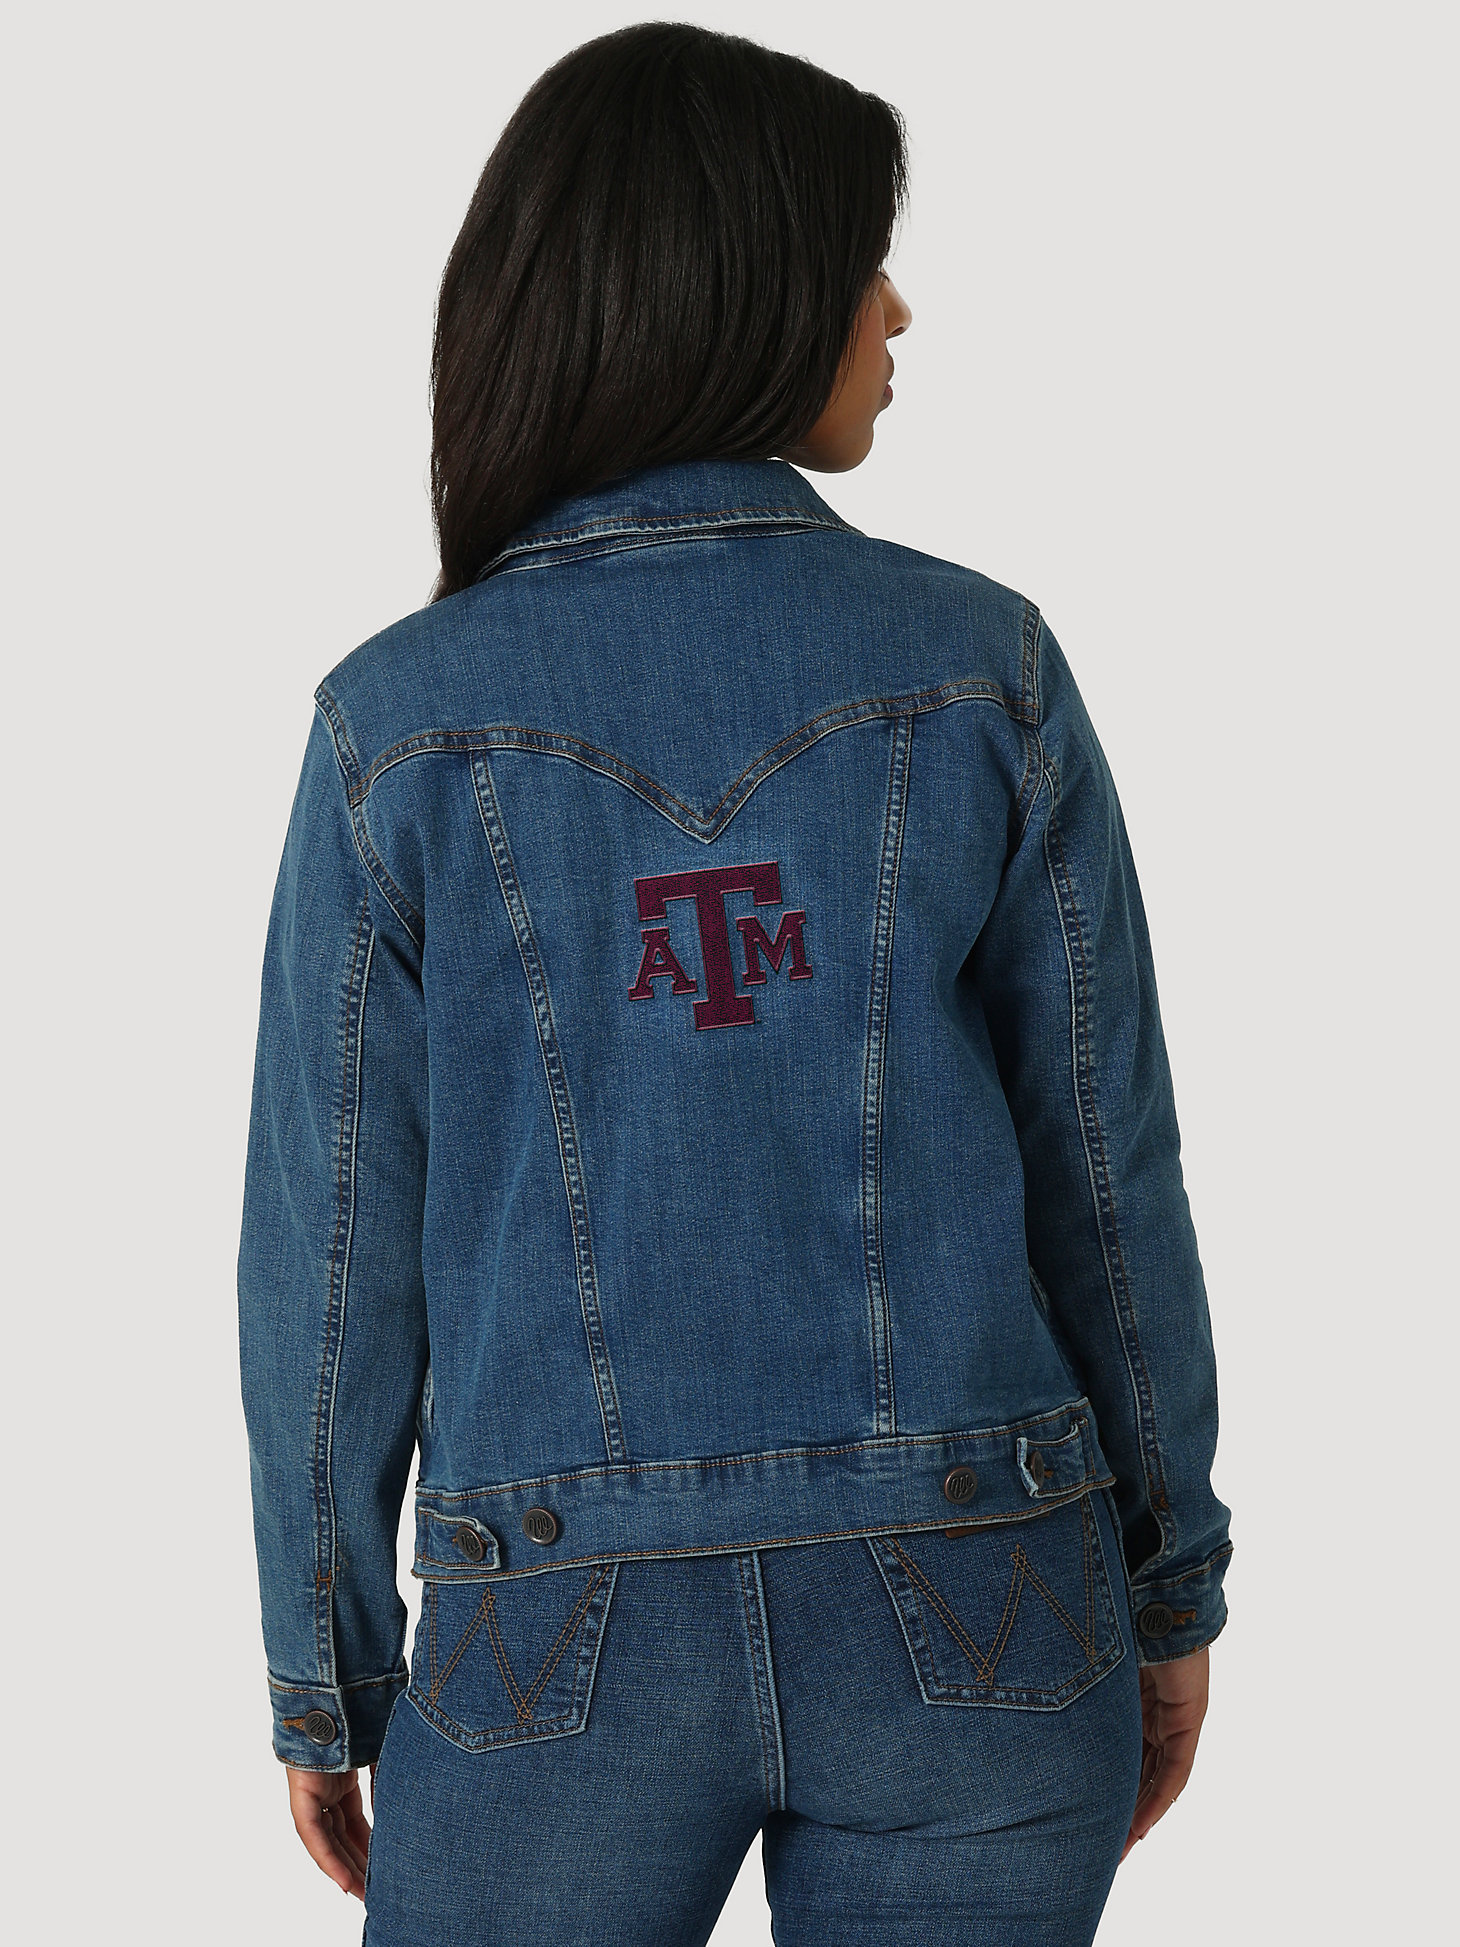 Women's Wrangler Collegiate Embroidered Classic Fit Denim Jacket in Texas A&M alternative view 1